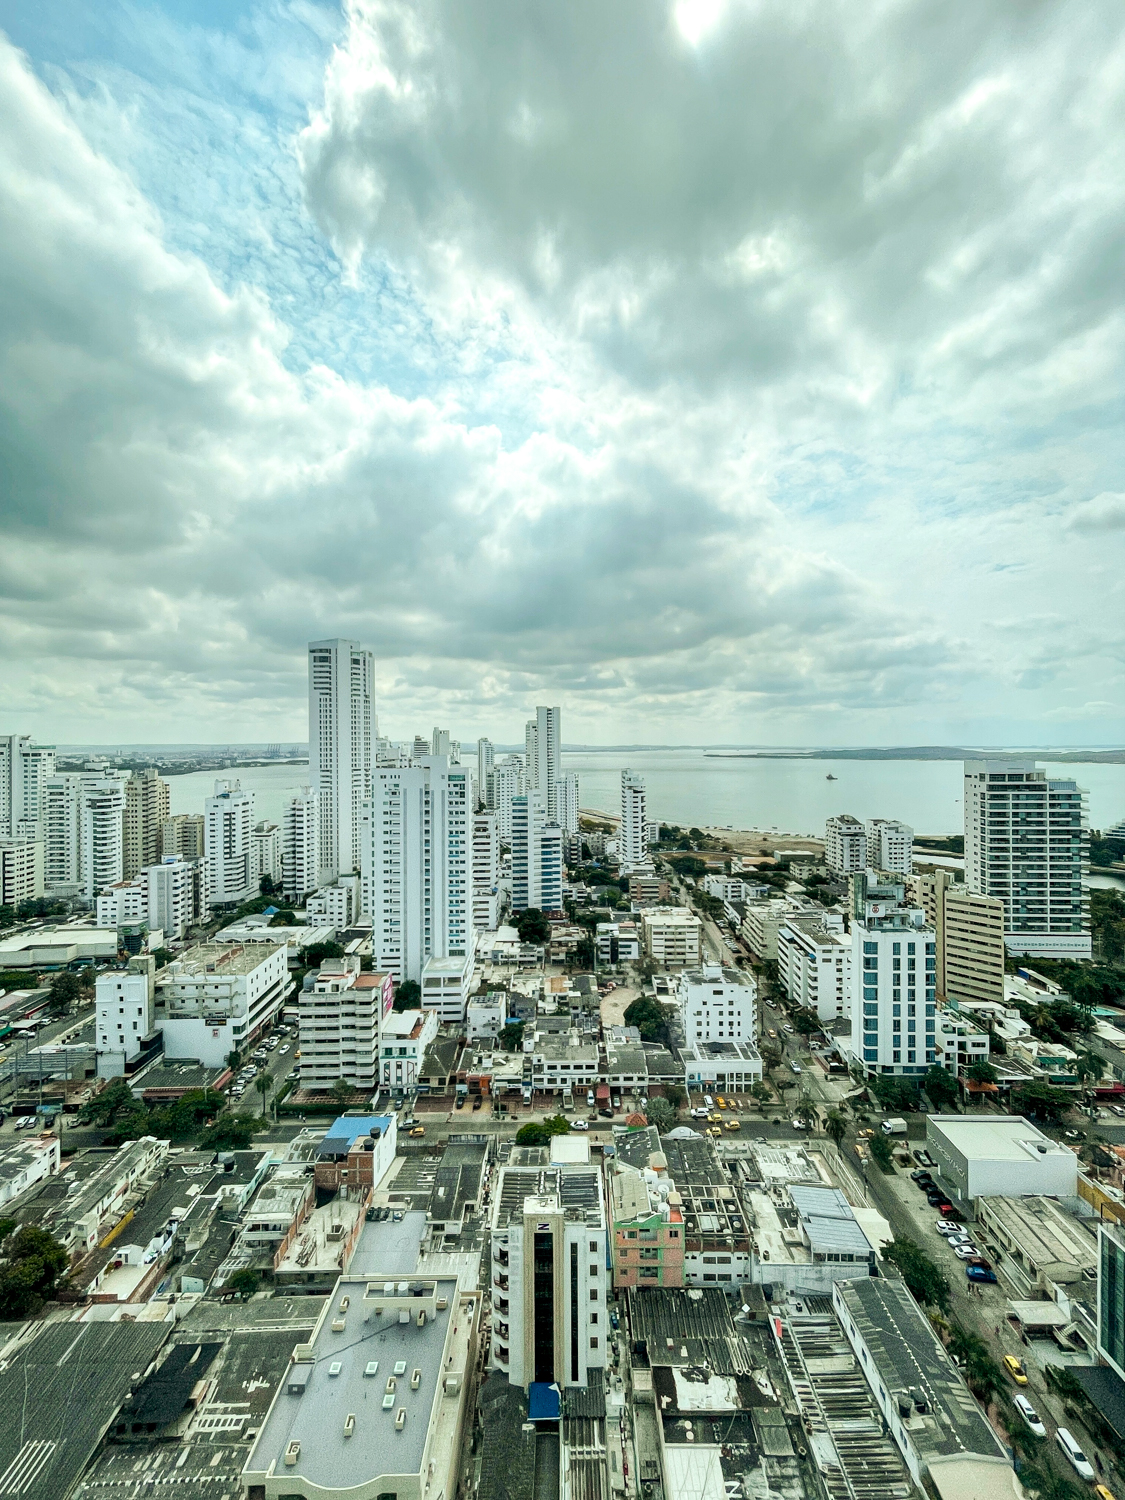 city view from intercontinental cartagena hotel